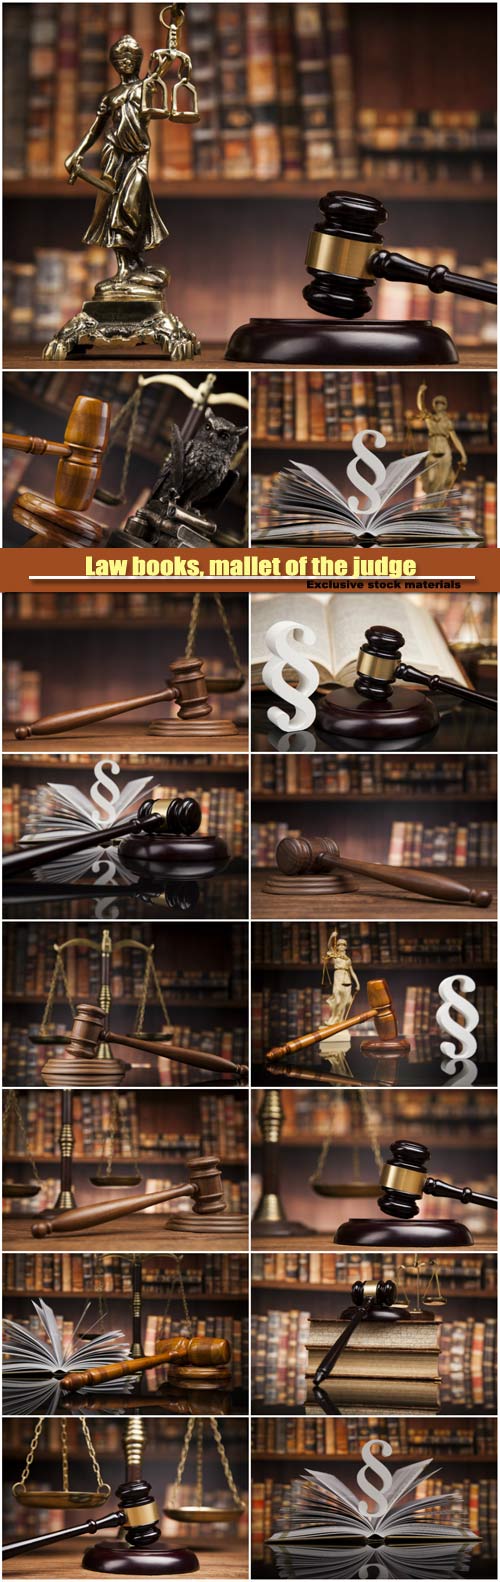 Law books, mallet of the judge, paragraph justice concept, law theme